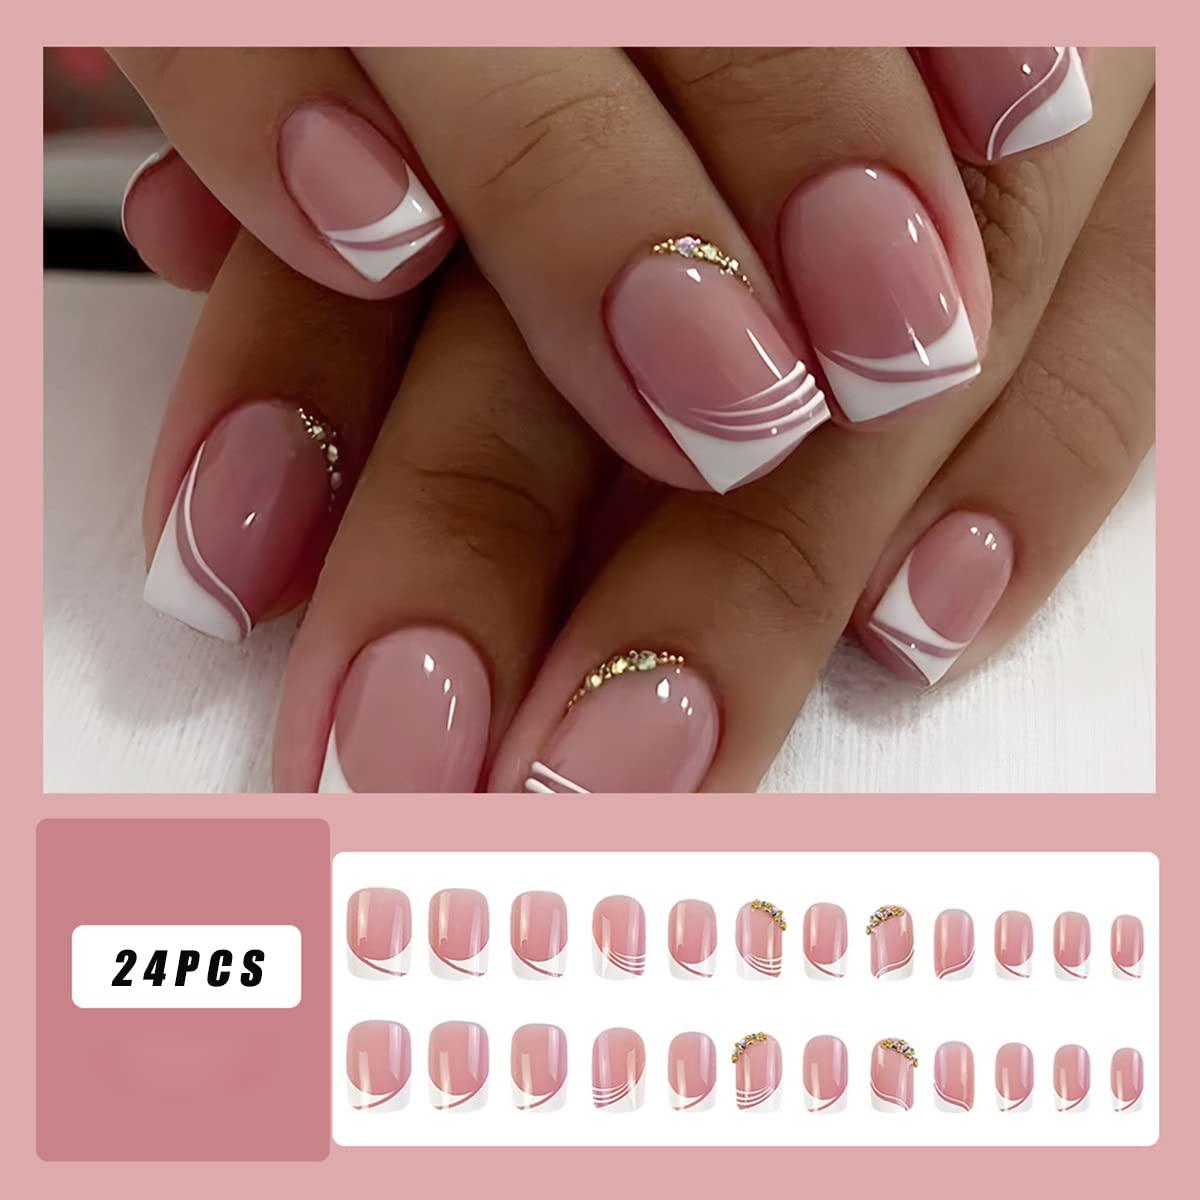 Buy Casual Nails | Casual Press on nails | Artificial Nails – Beromt